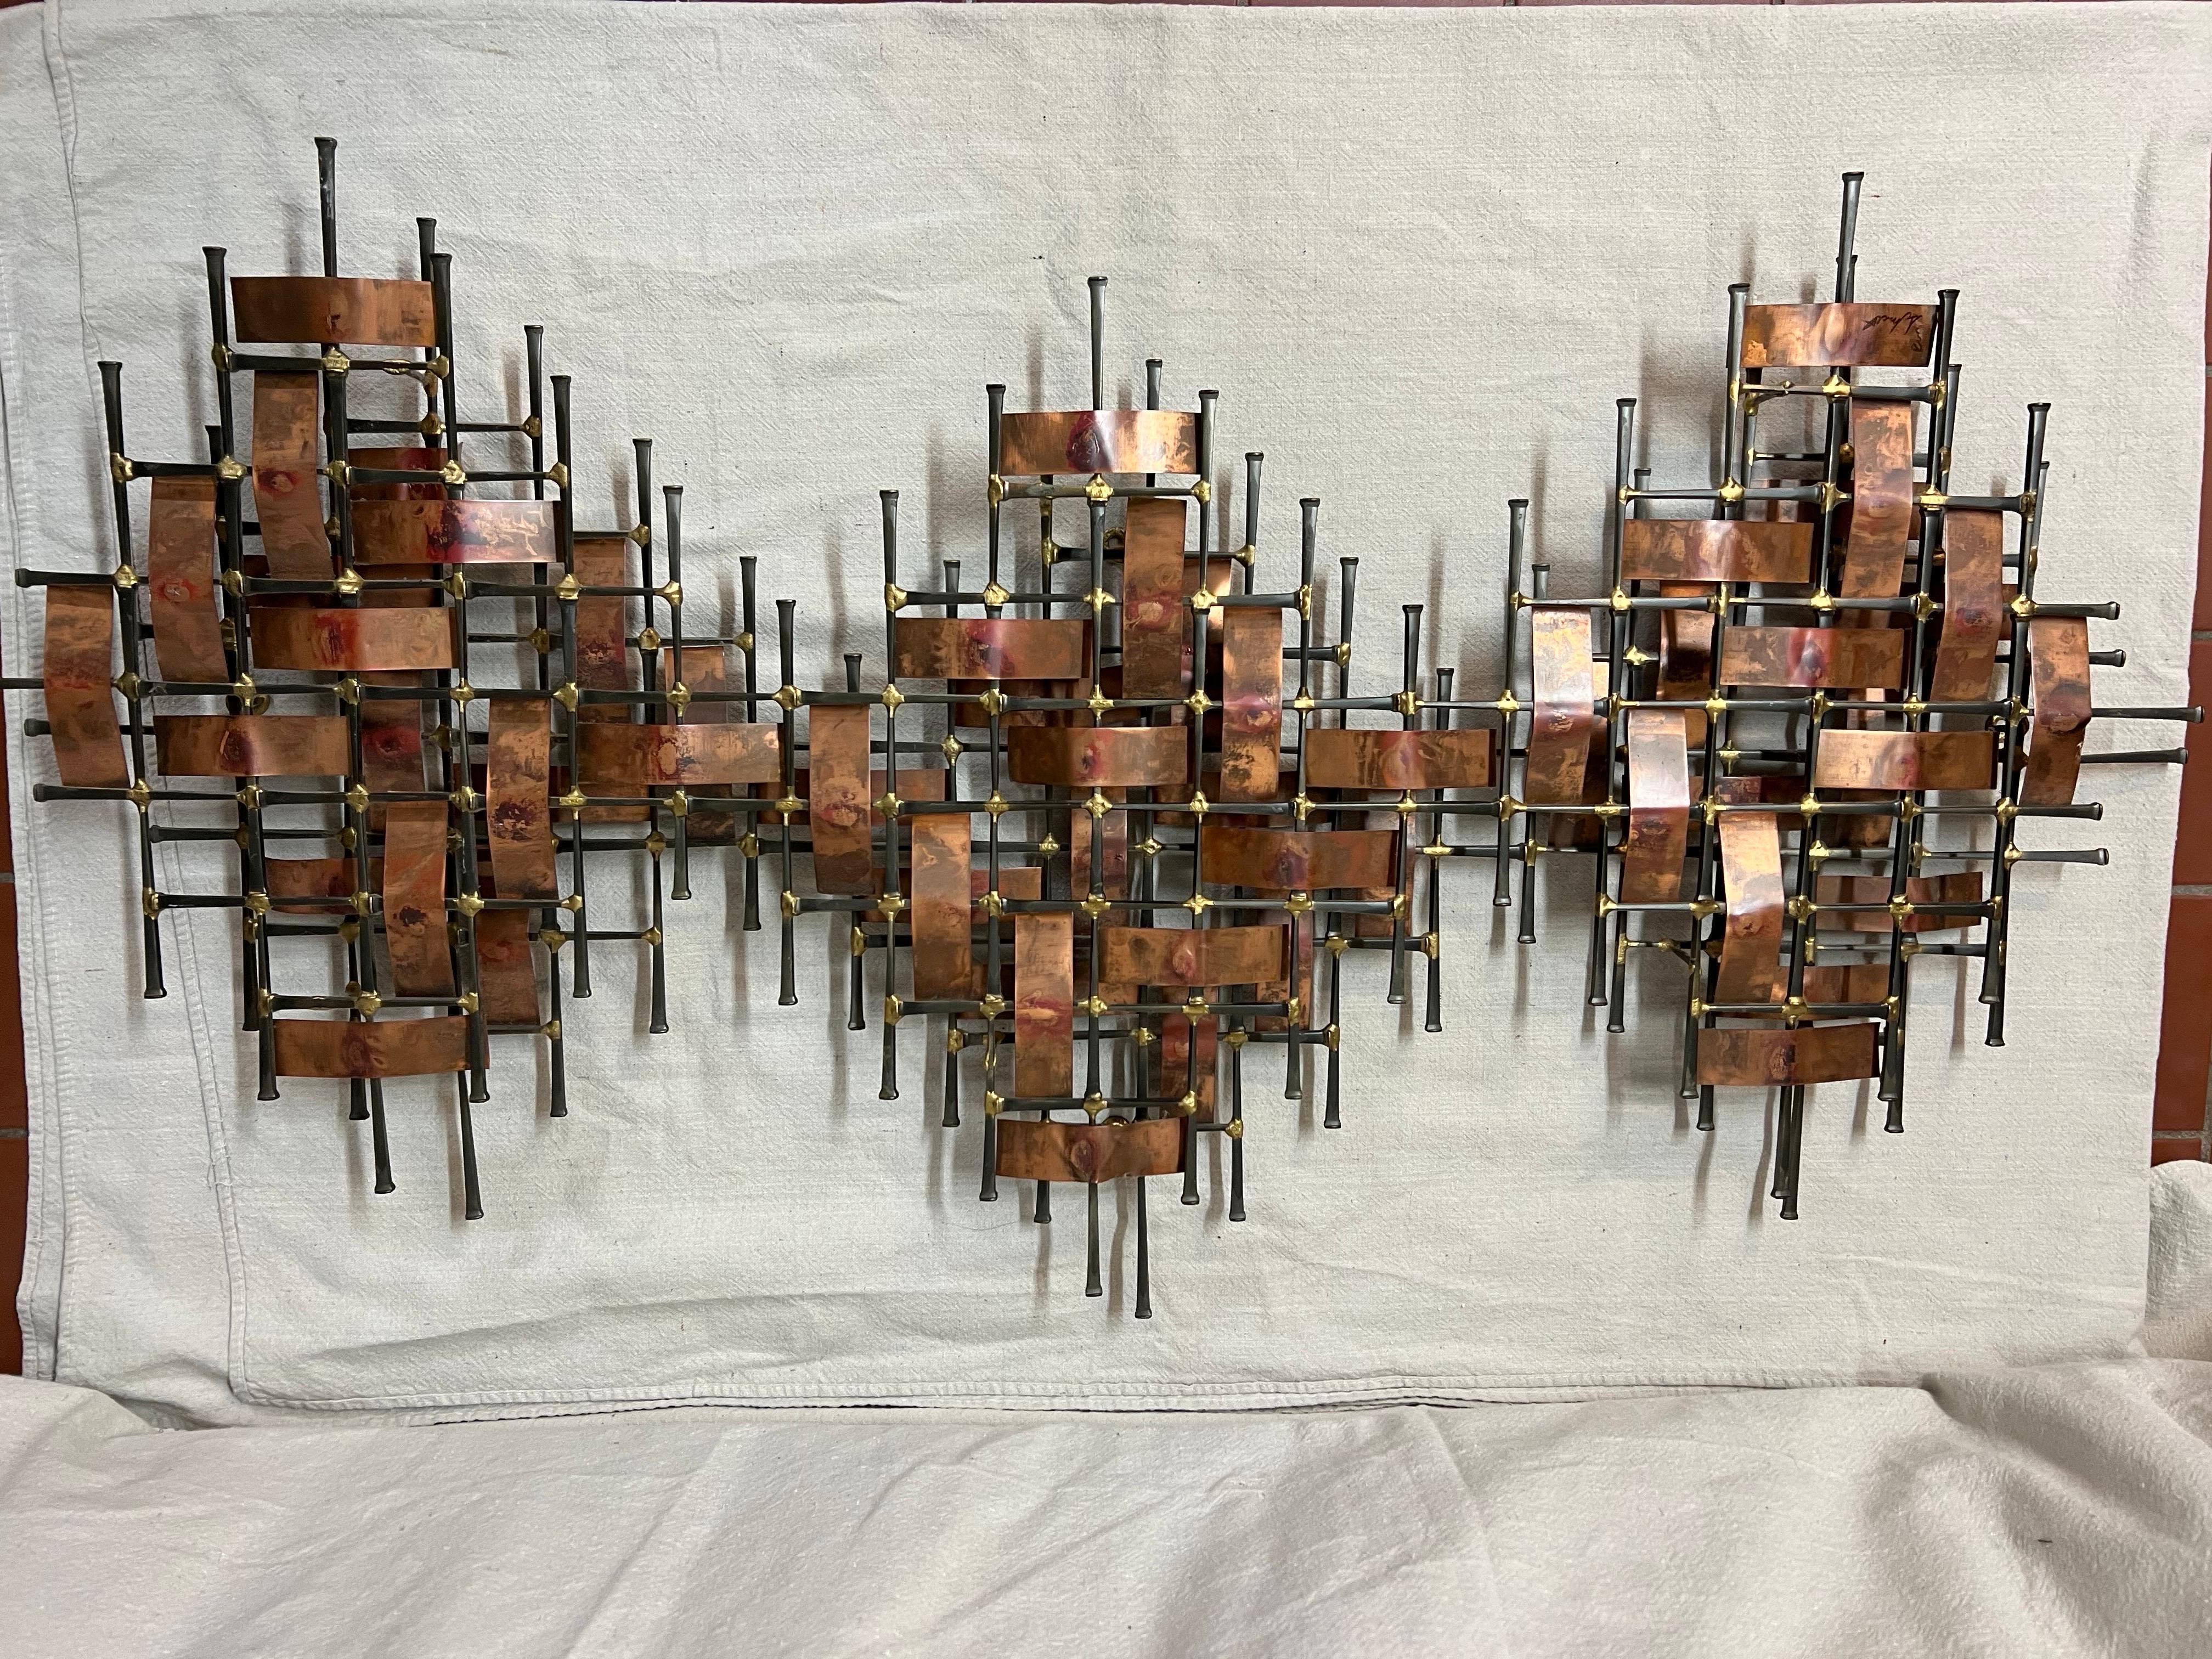 Brutalist Mid-Century Modern Nail Art sculpture signed Schwartz. Brutalist style copper and steel wall sculpture handmade and signed by Ron Schmidt. Highly textural woven metal design with mixed metal tones. Hang vertically or horizontally.